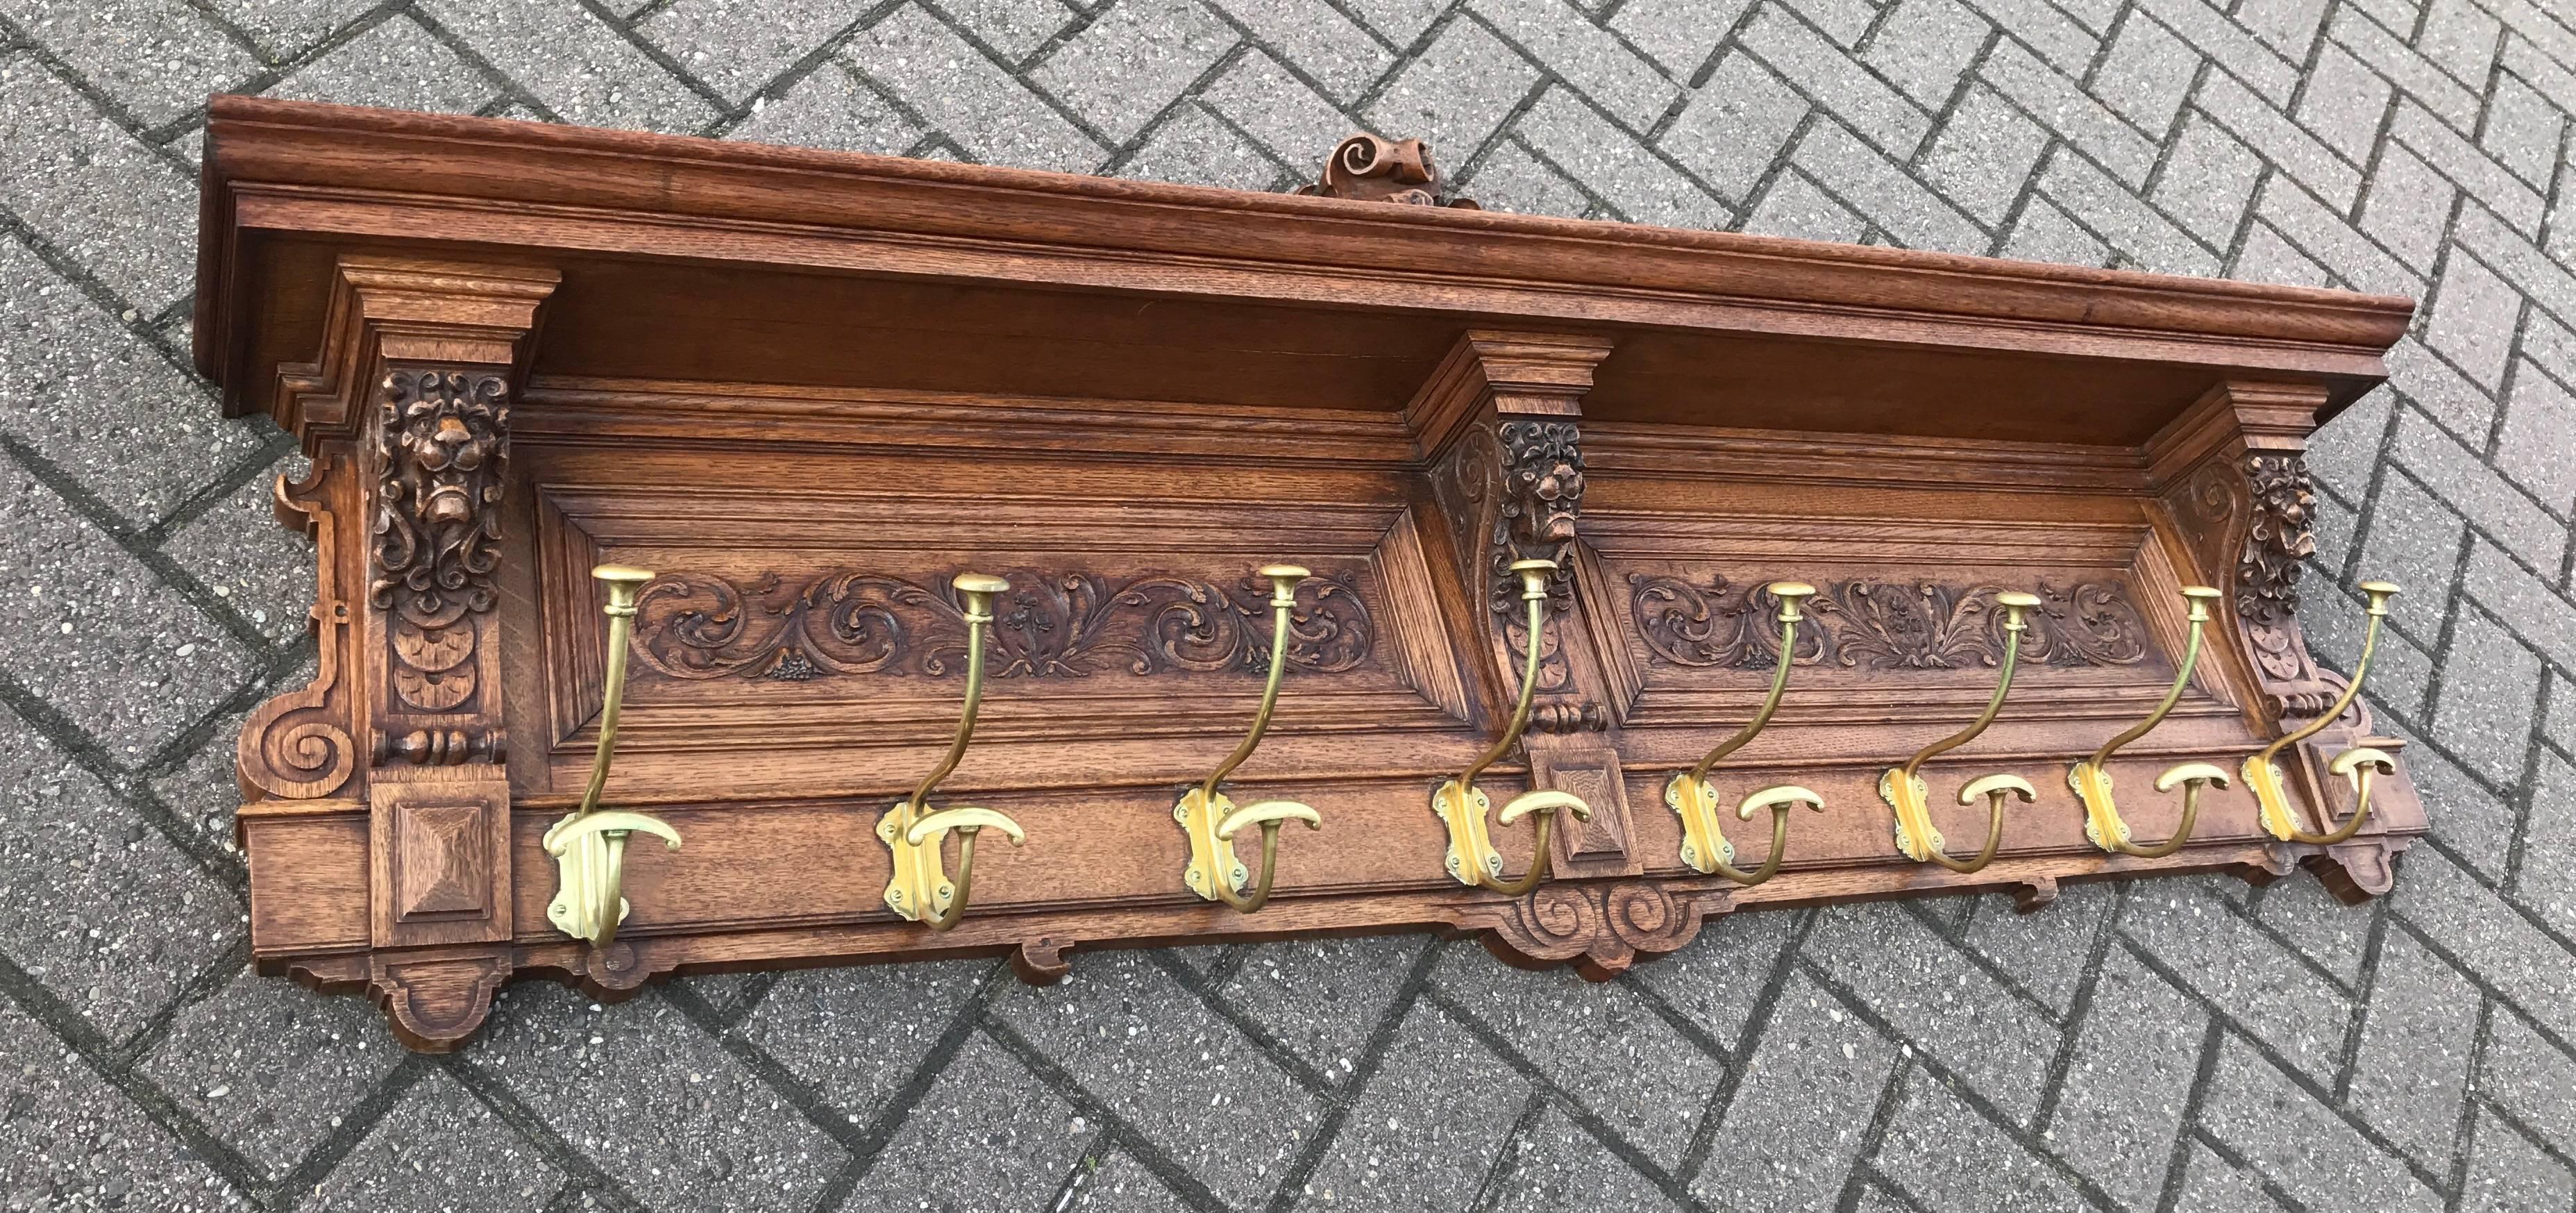 Large and stunning, solid oak coat rack with very impressive carvings.

We all know how important first impressions are and with a stunning antique coat rack such as this one, you will never fail to impress anyone entering your home or office. It is